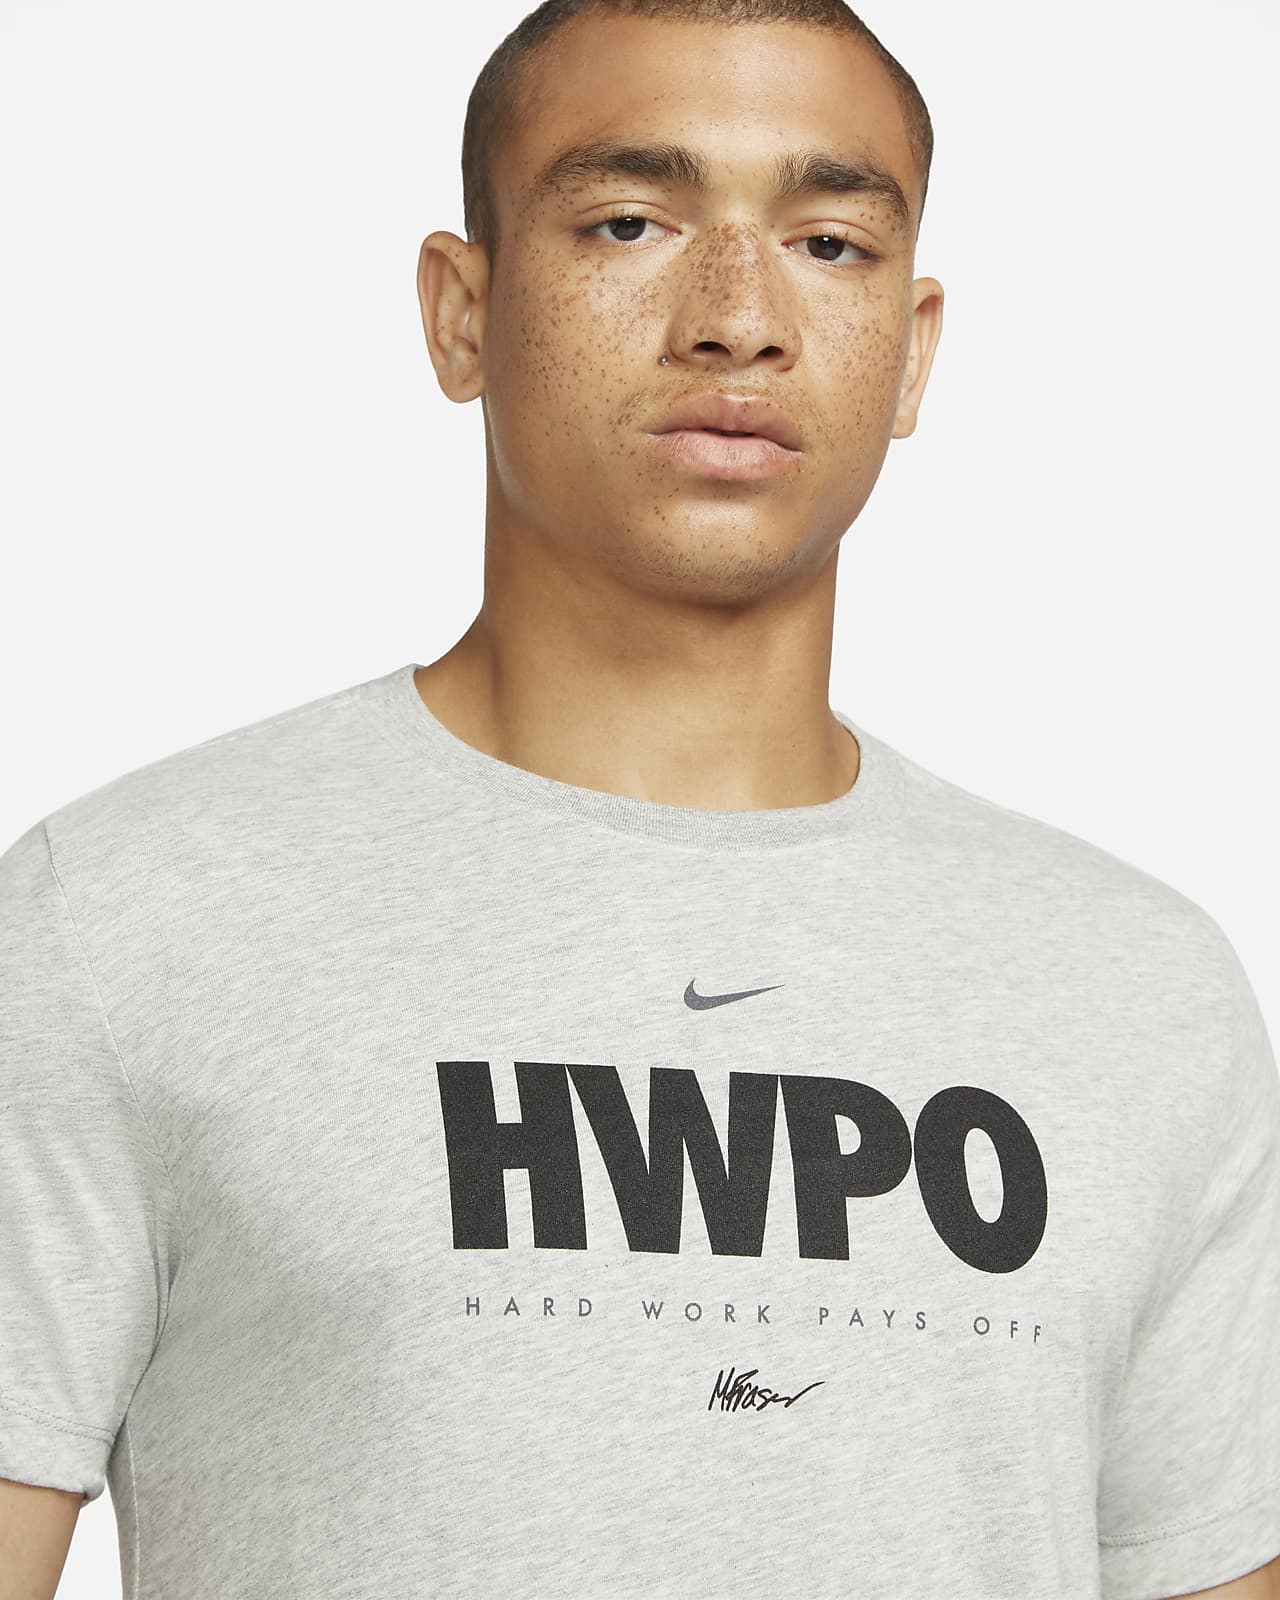 Buy > nike hard work pays off shirt > in stock